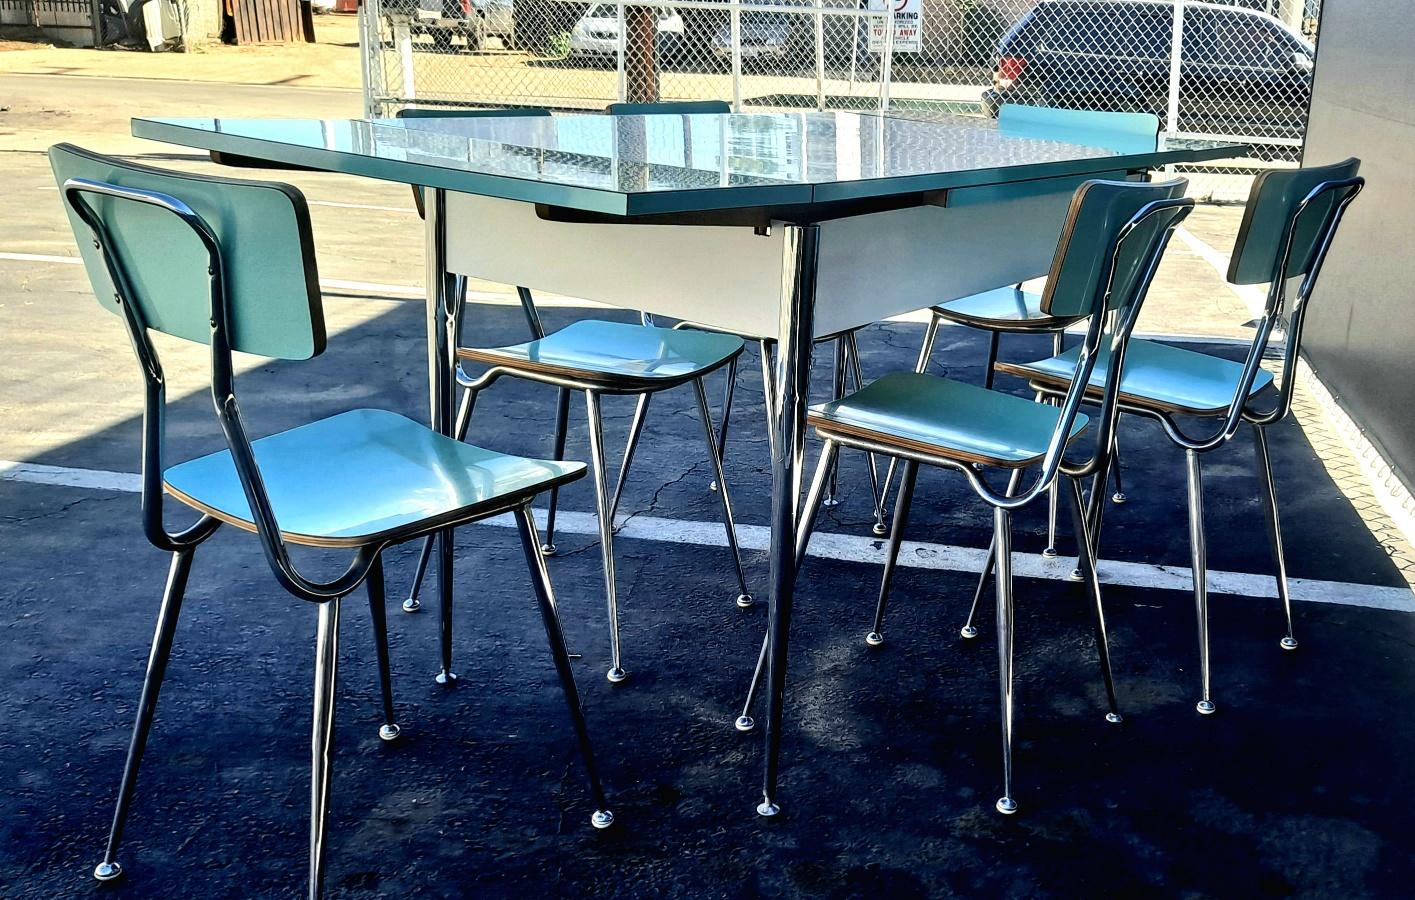 Italian mid century dining table and six chairs. Chrome srtucture and formica. Table is extendable from 4 - 6 people. The set is in good vintage condition, tarnish chrome. Table dimension for 4 people is 48.5 inches nd extendable 73 inches.The color